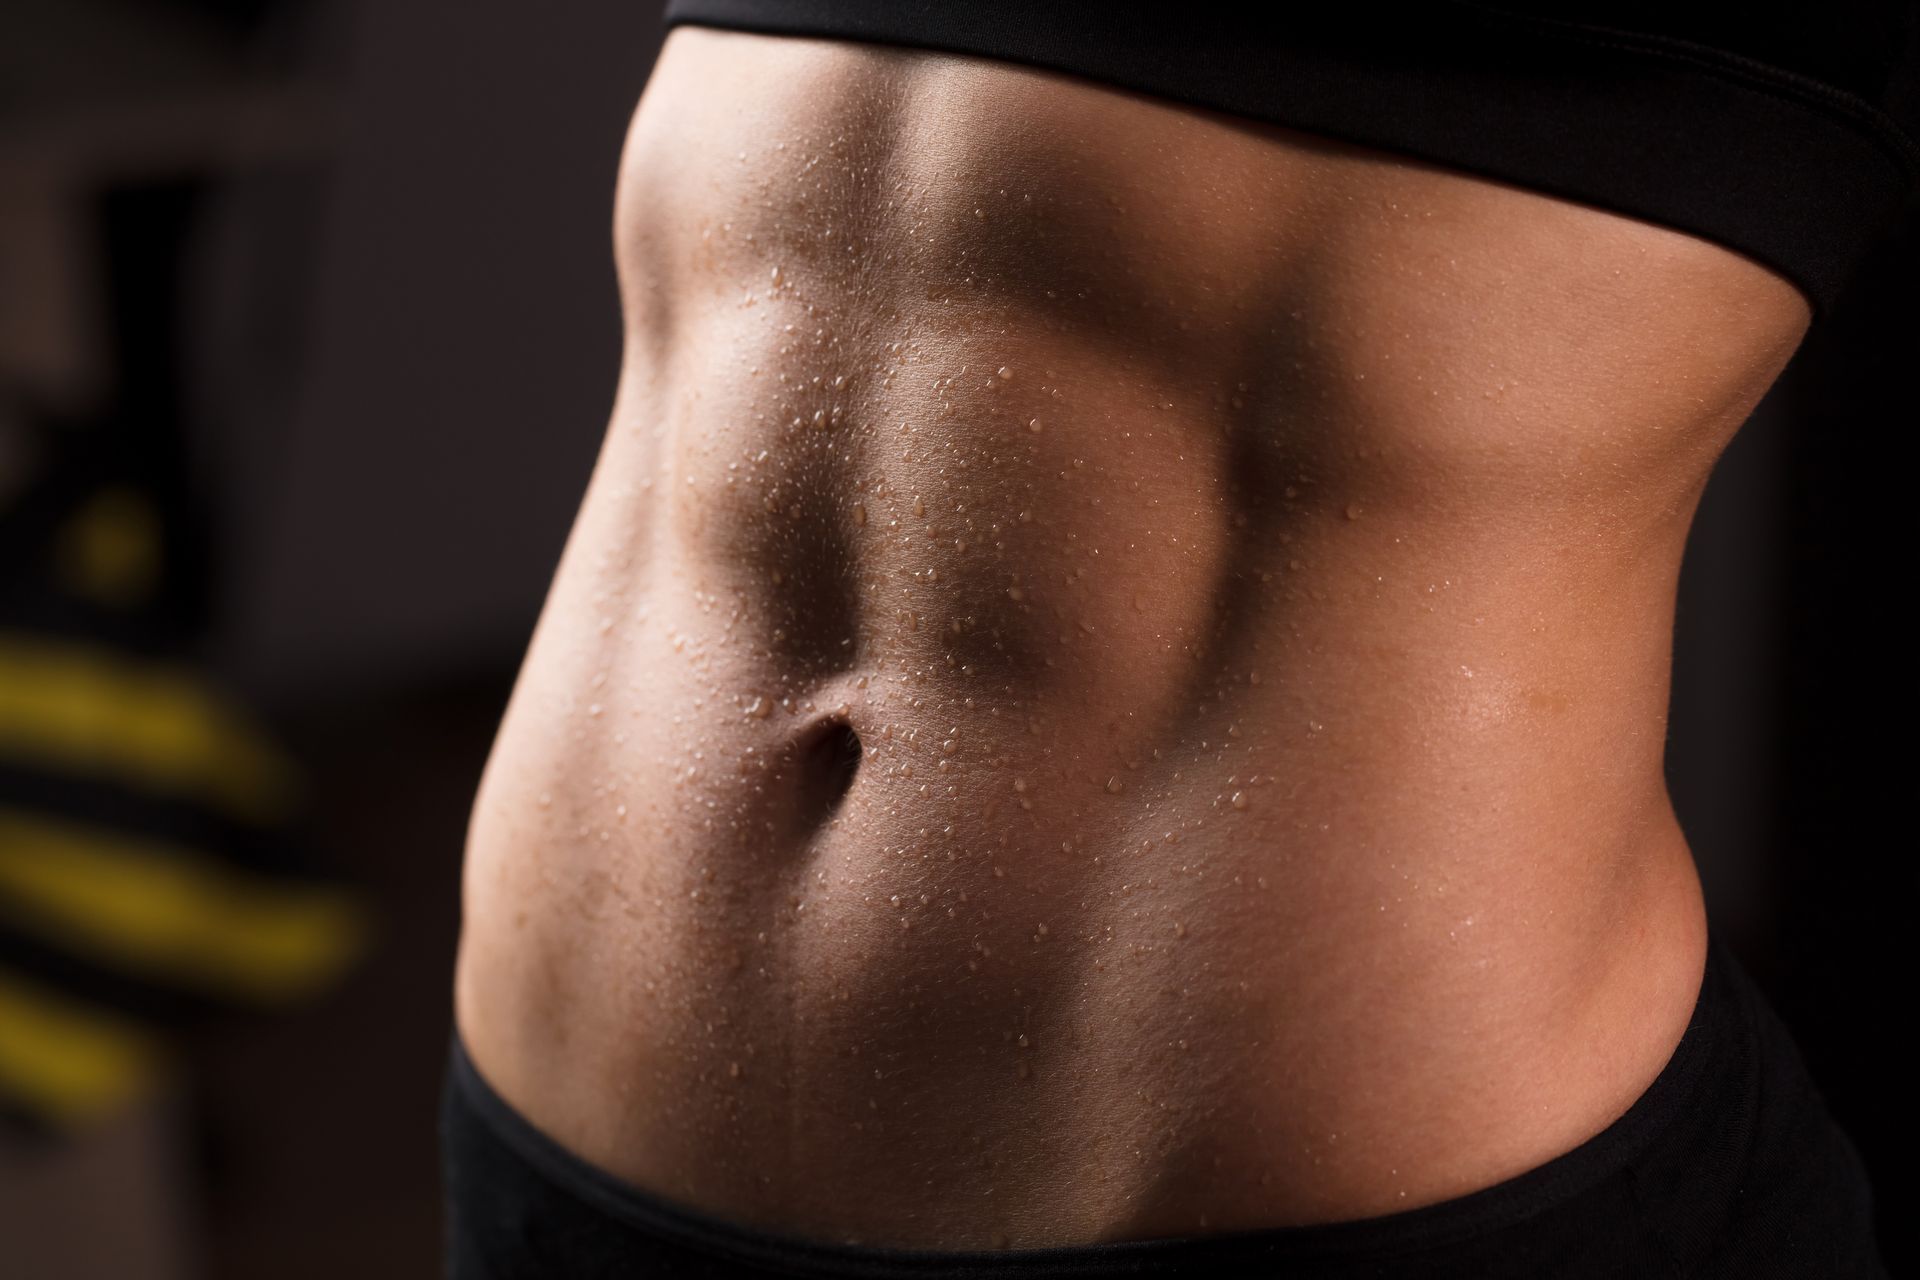 A picture of a woman's flat stomach with abs